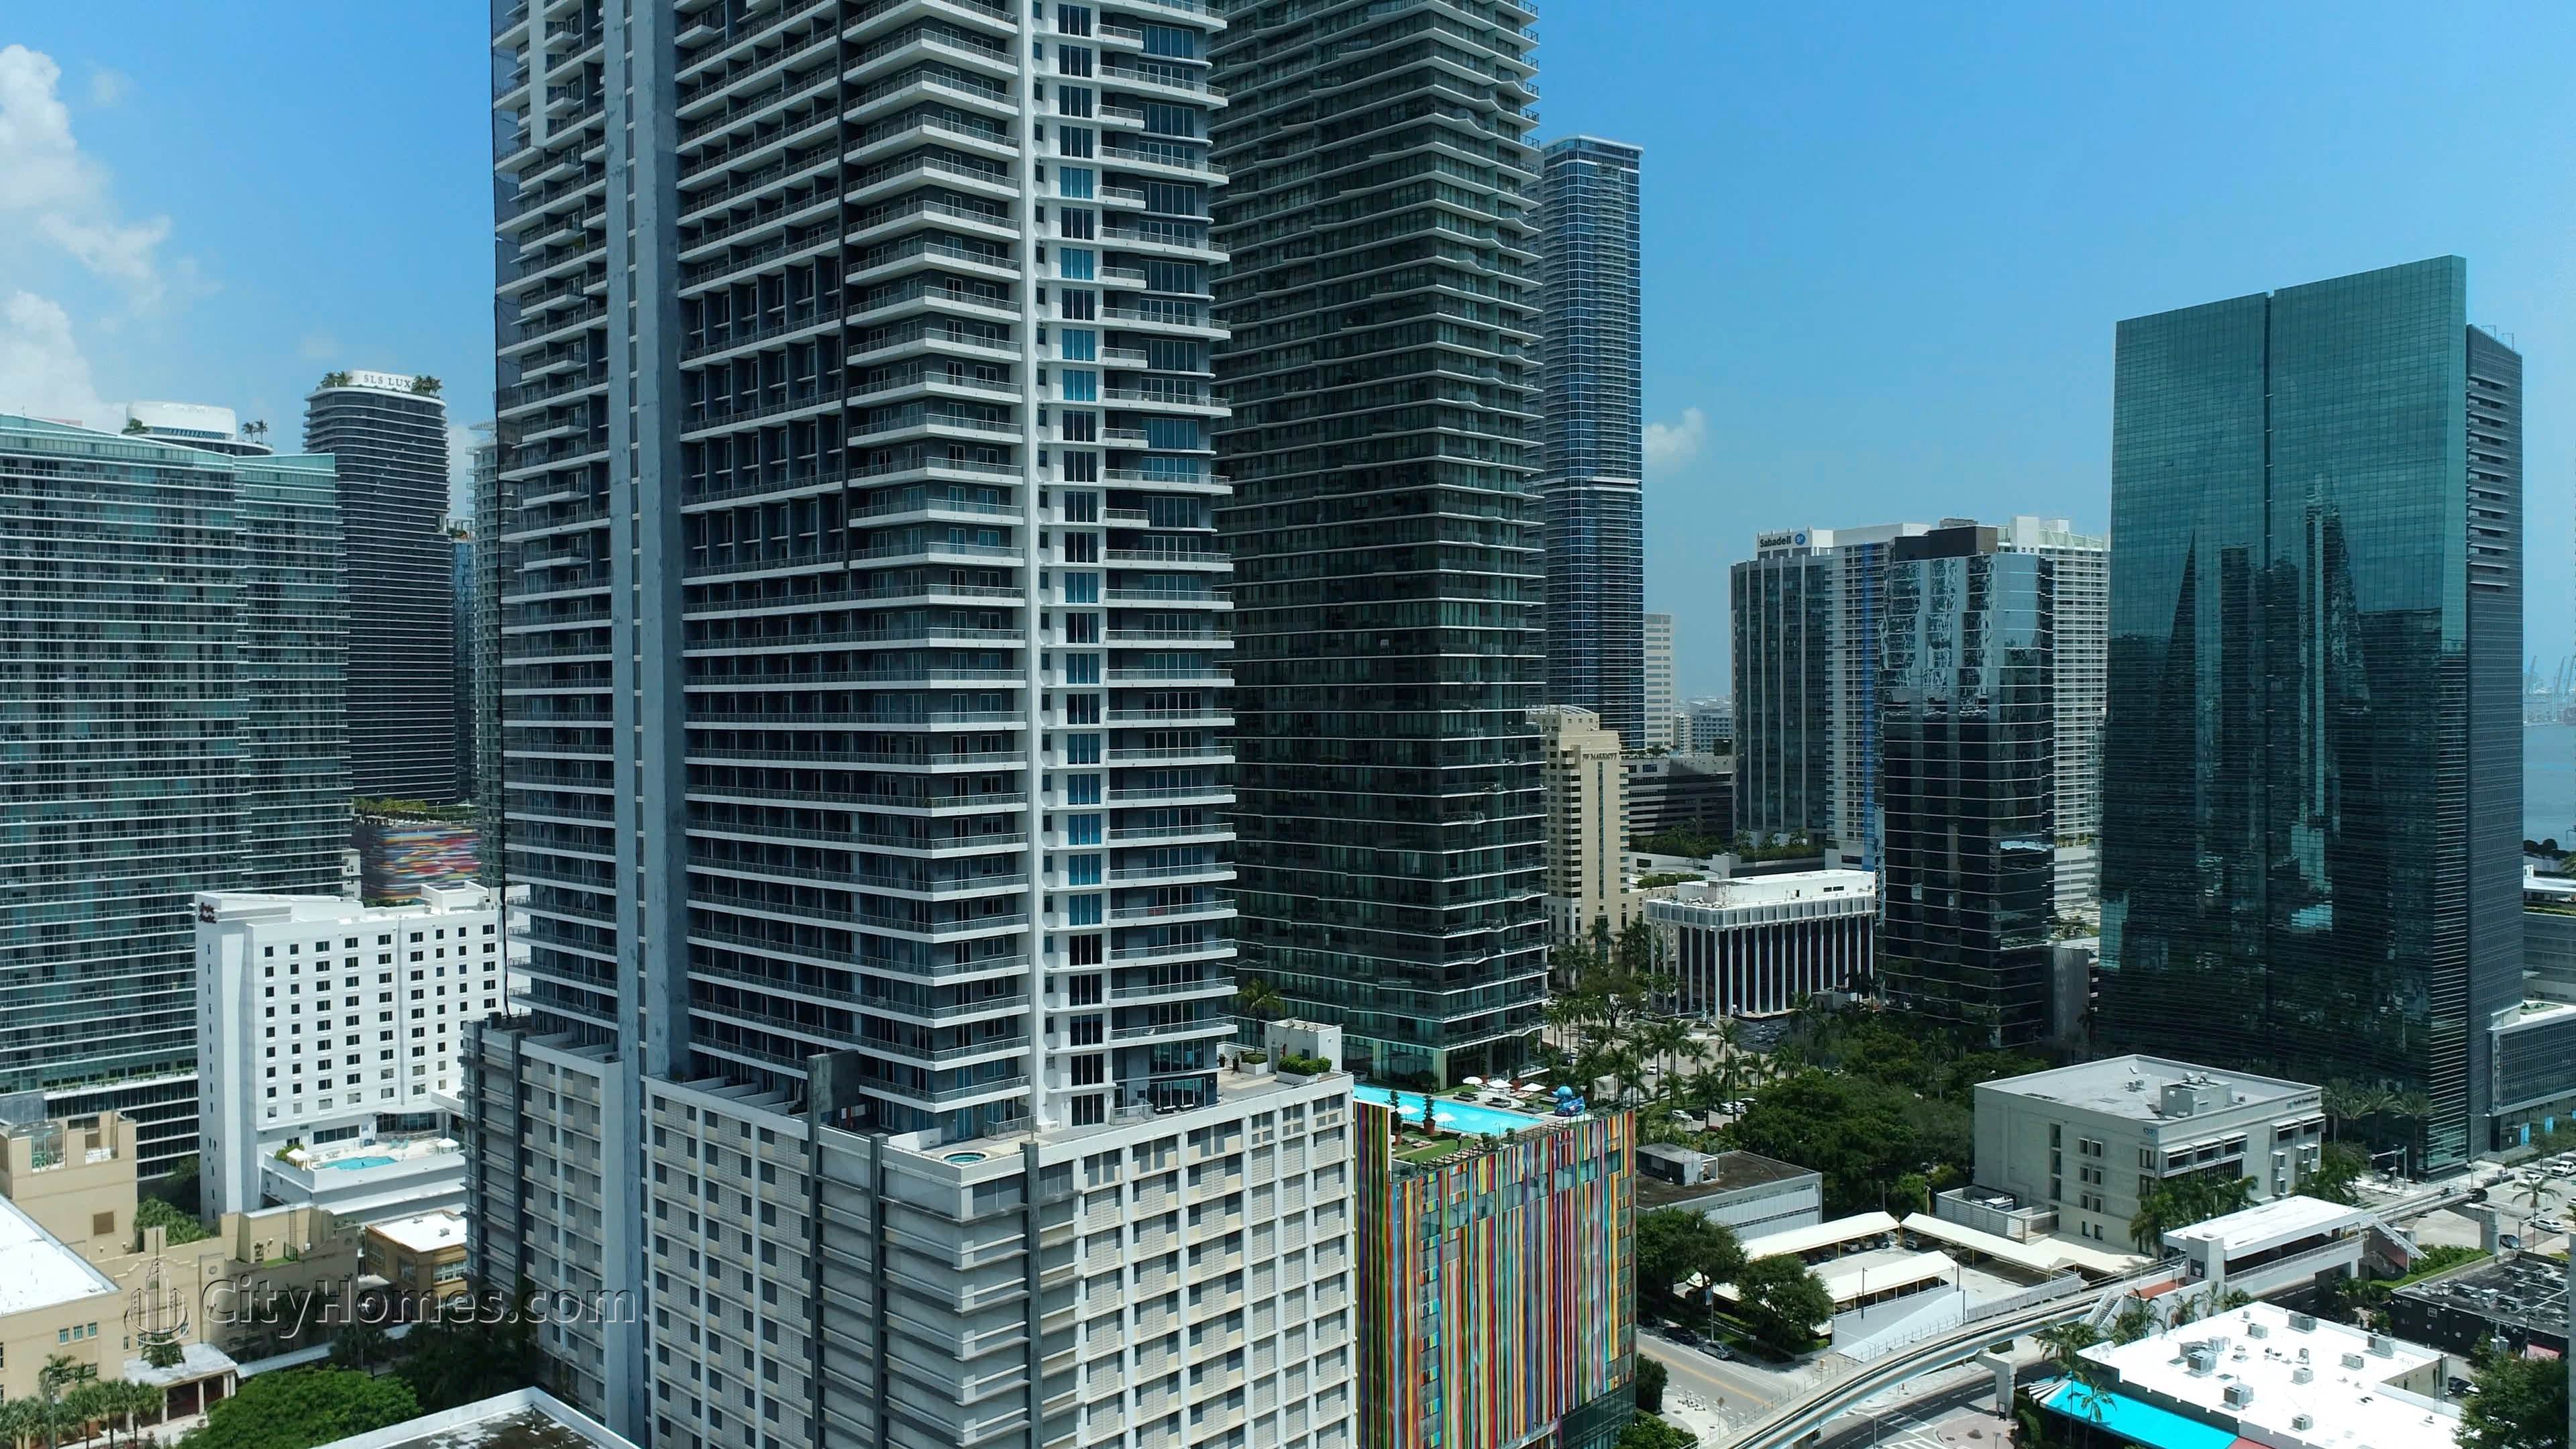 4. Infinity building at 60 SW 13th St, Brickell, Miami, FL 33130